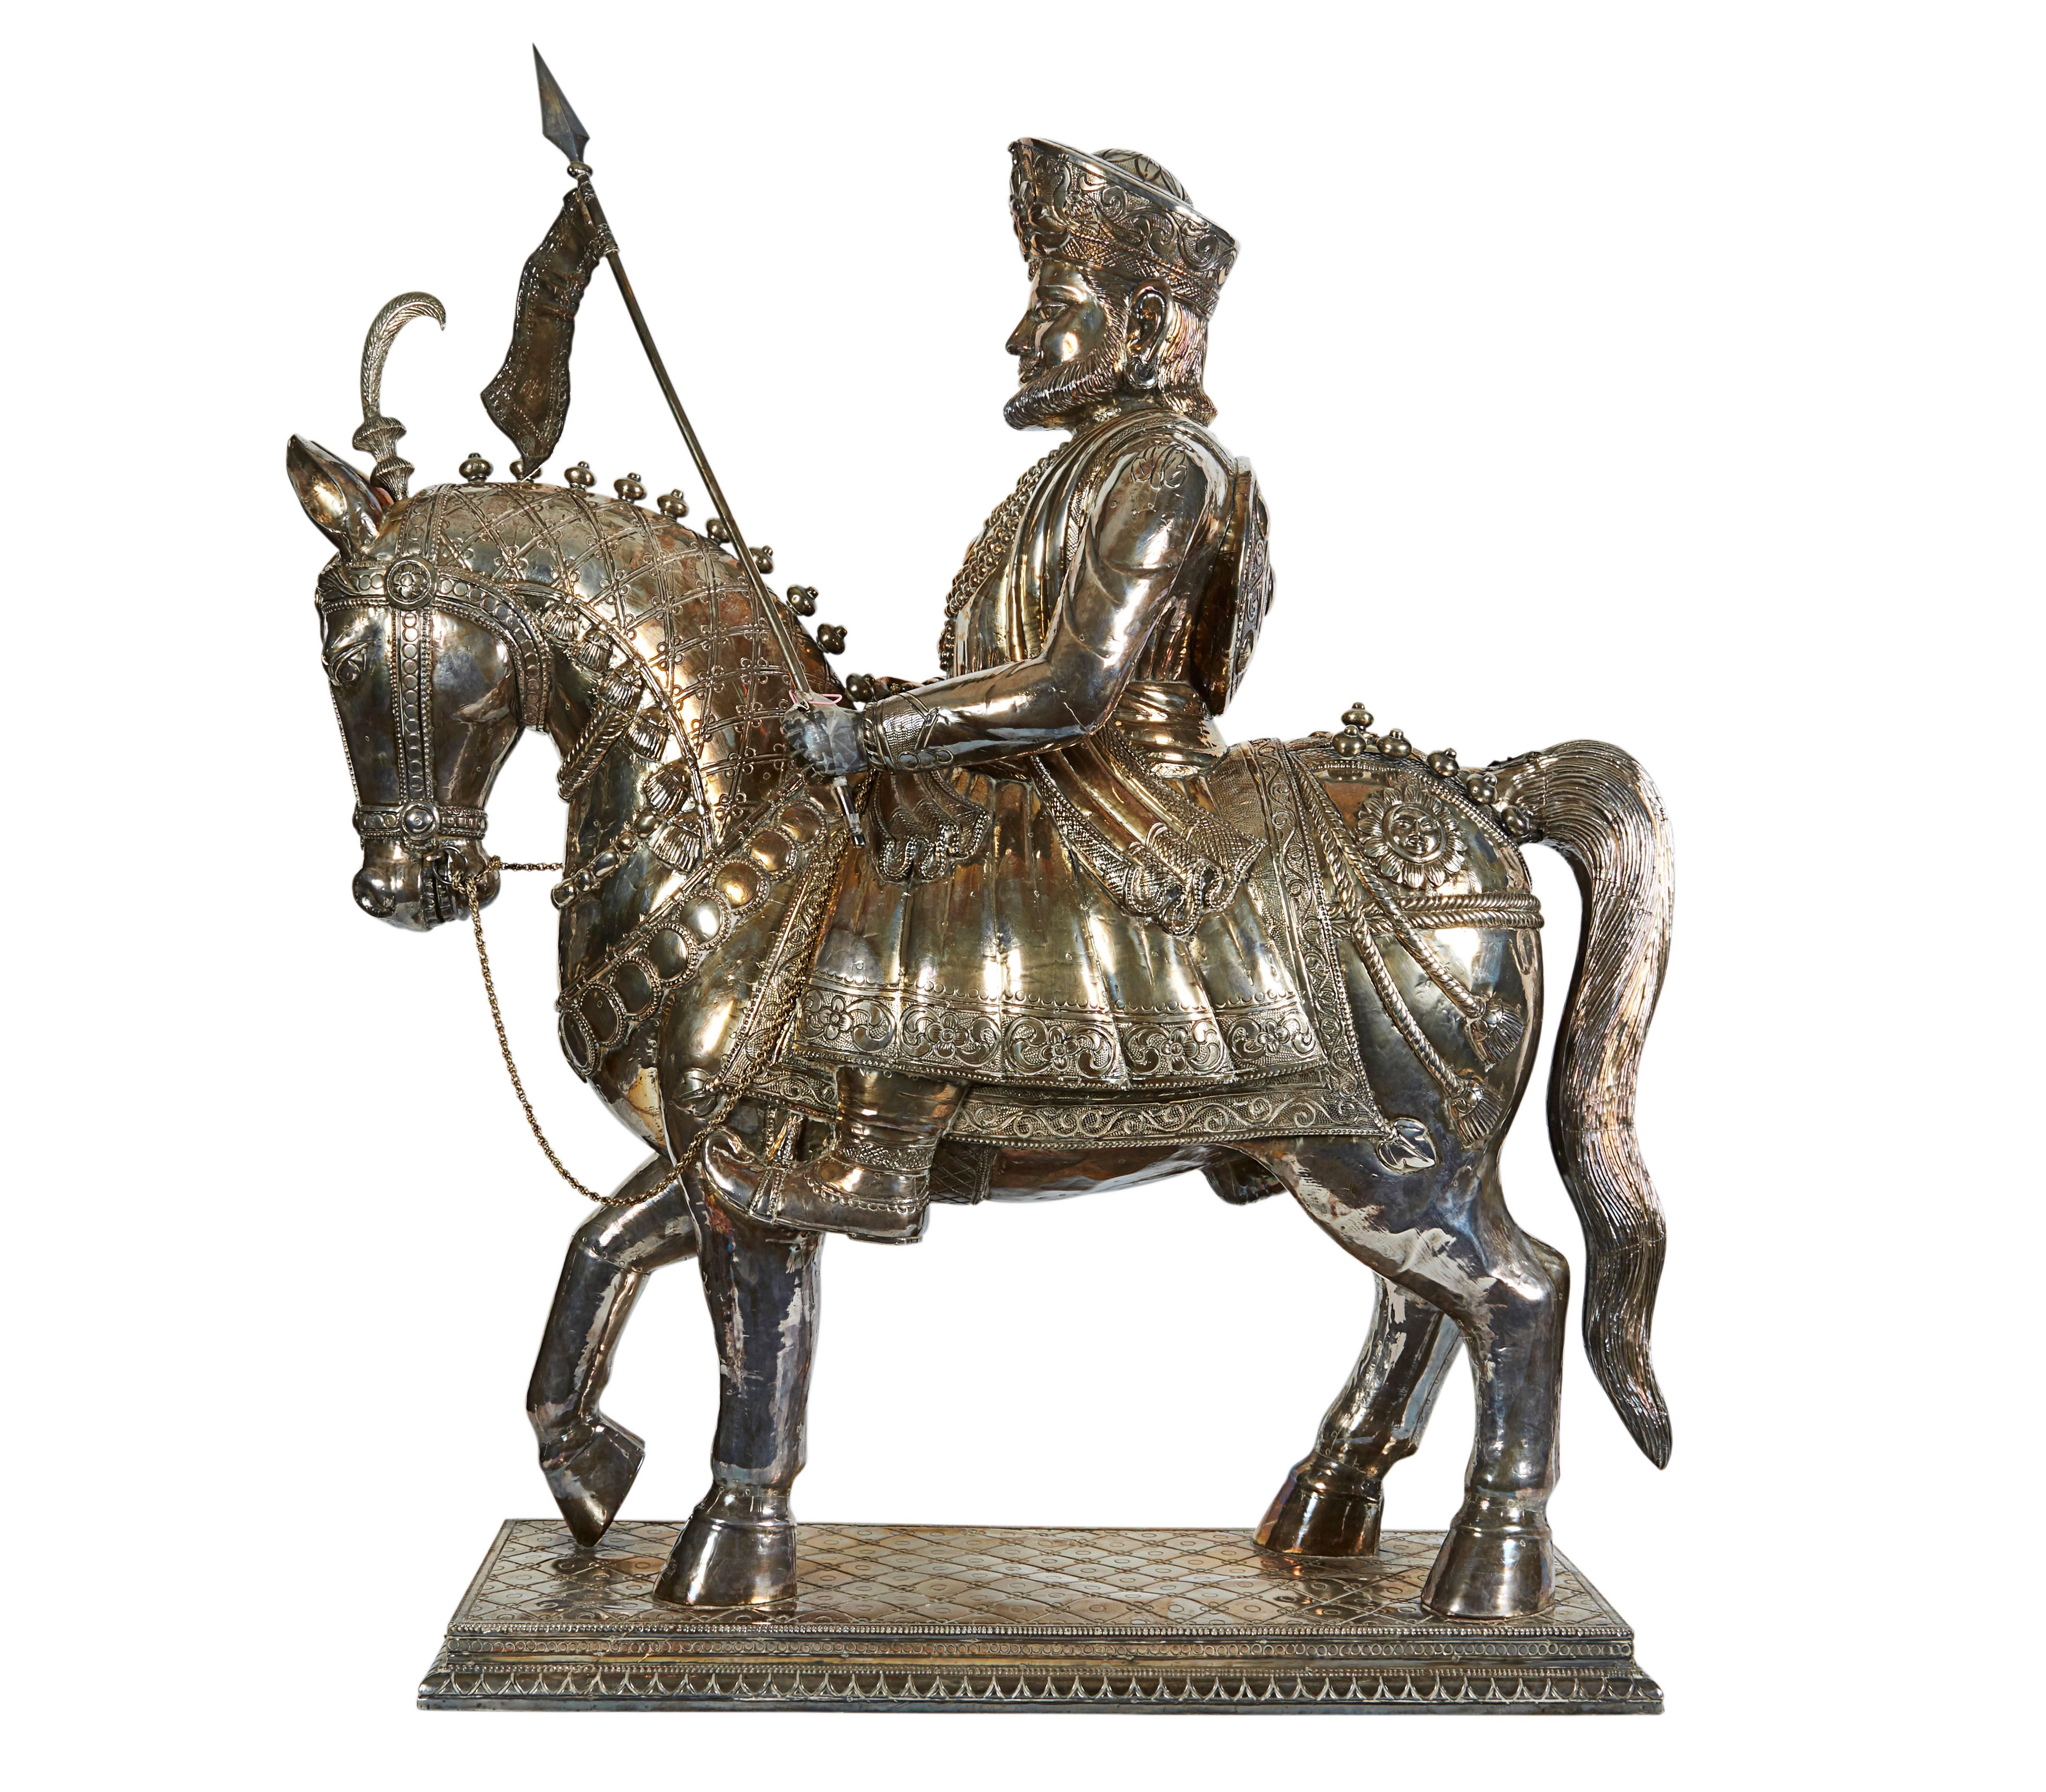 A monumental colonial Indian silver over wood figure of a Bombay Cavalryman.

India, early 20th century.

This monumental sculpture in the form of a well-dressed cavalryman on horseback, comprised of carved wood overlaid with sheets of pure